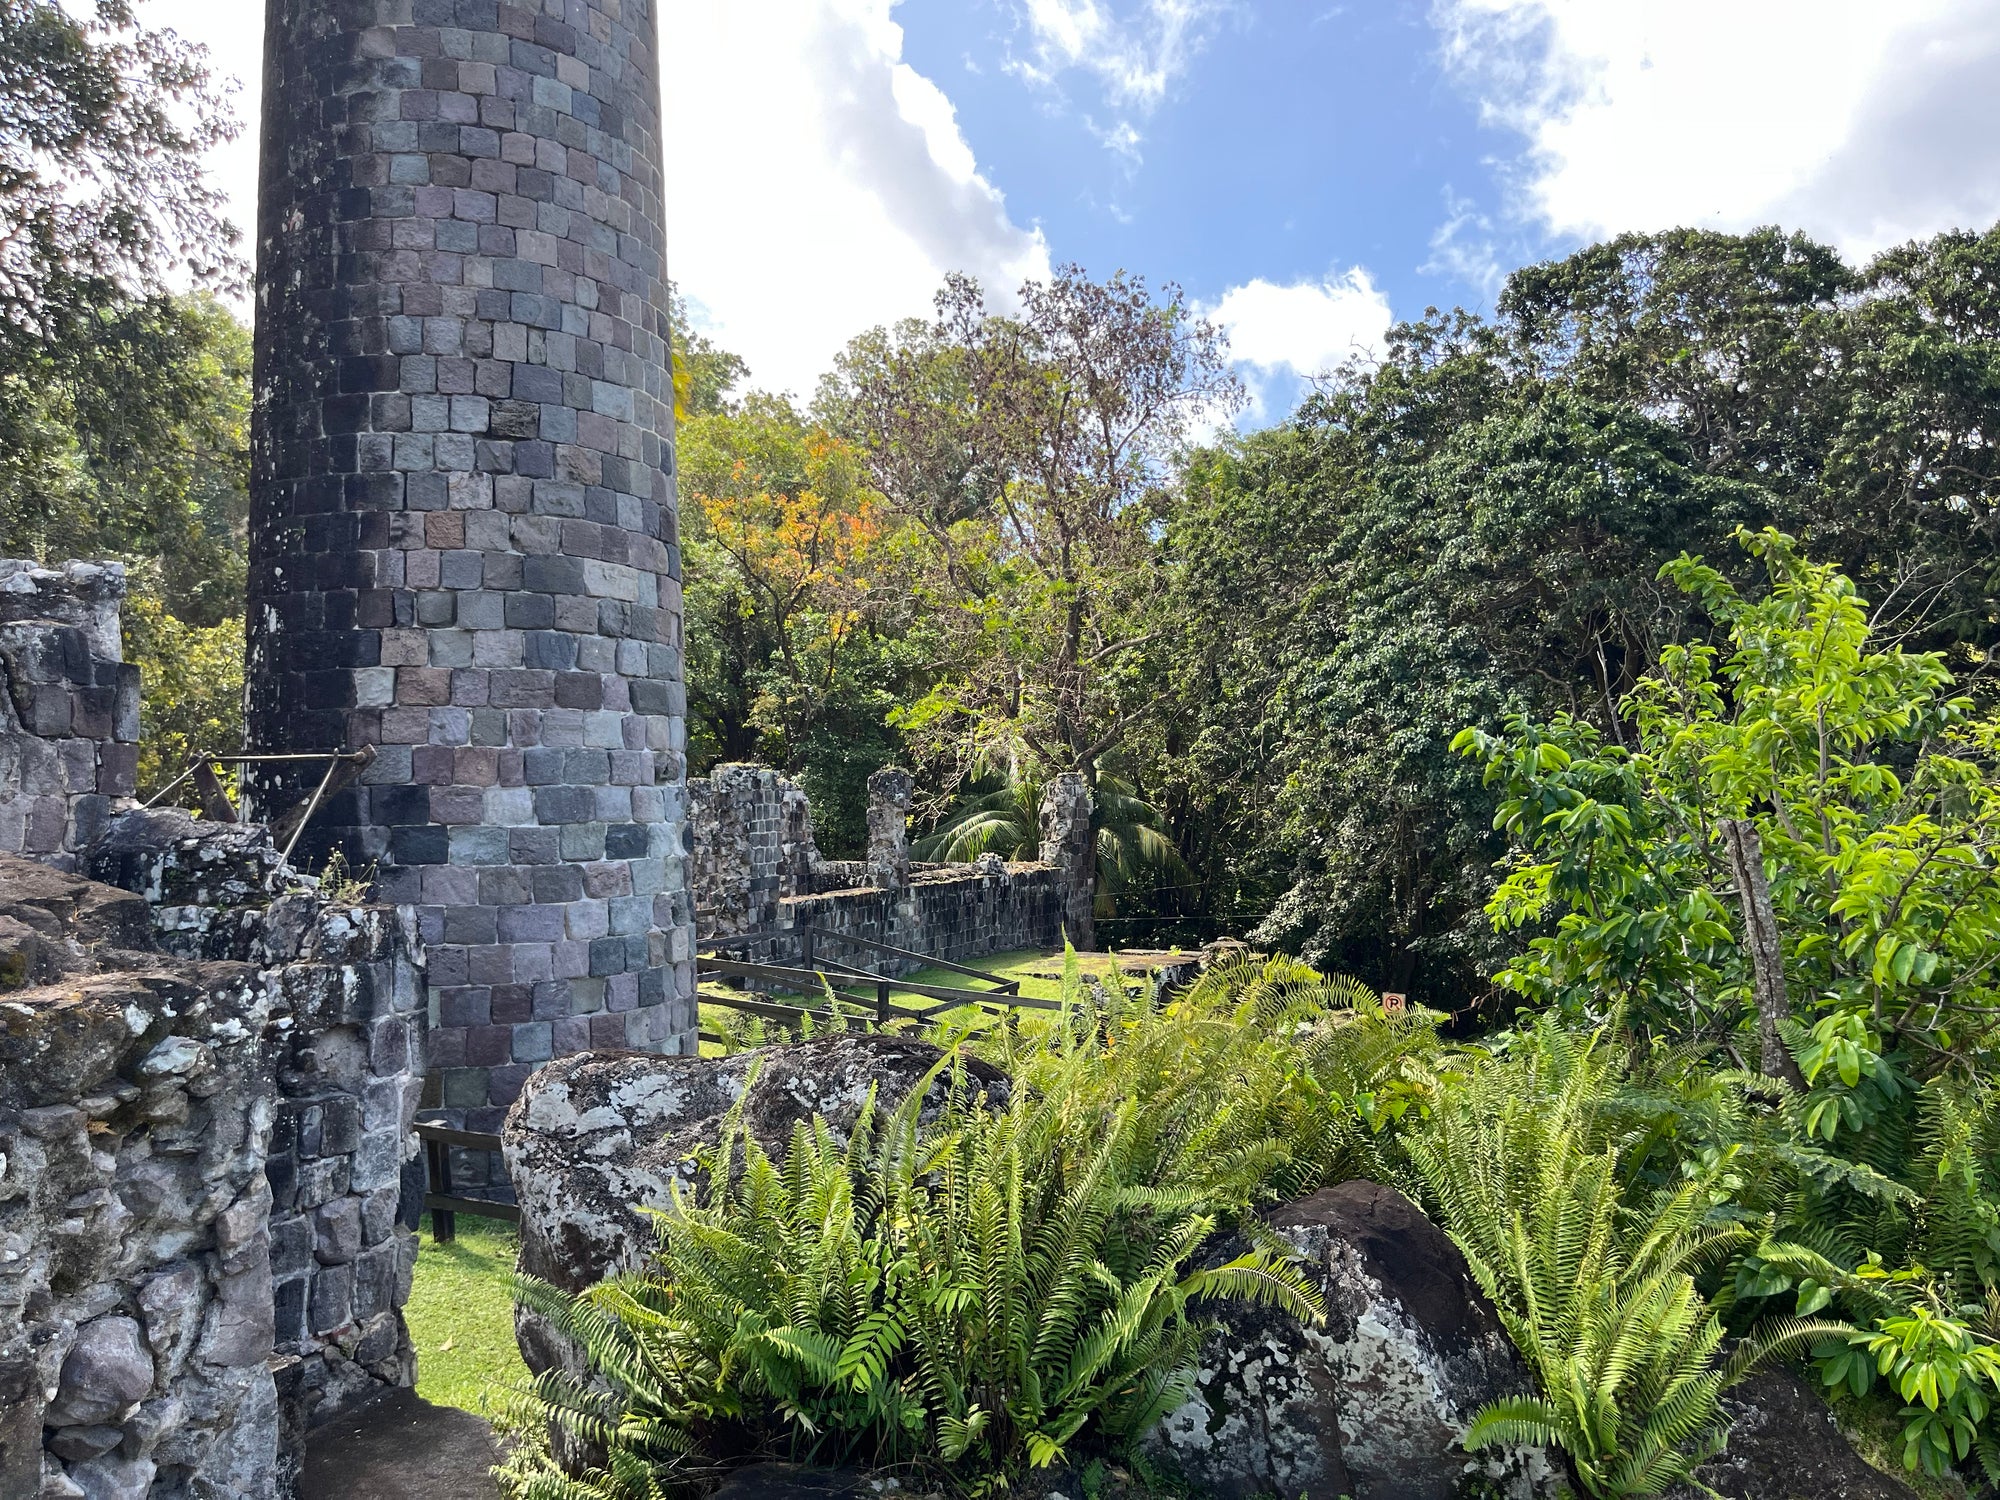 Nature is beginning to envelop the ruins of an old sugar refinery in St Kitts